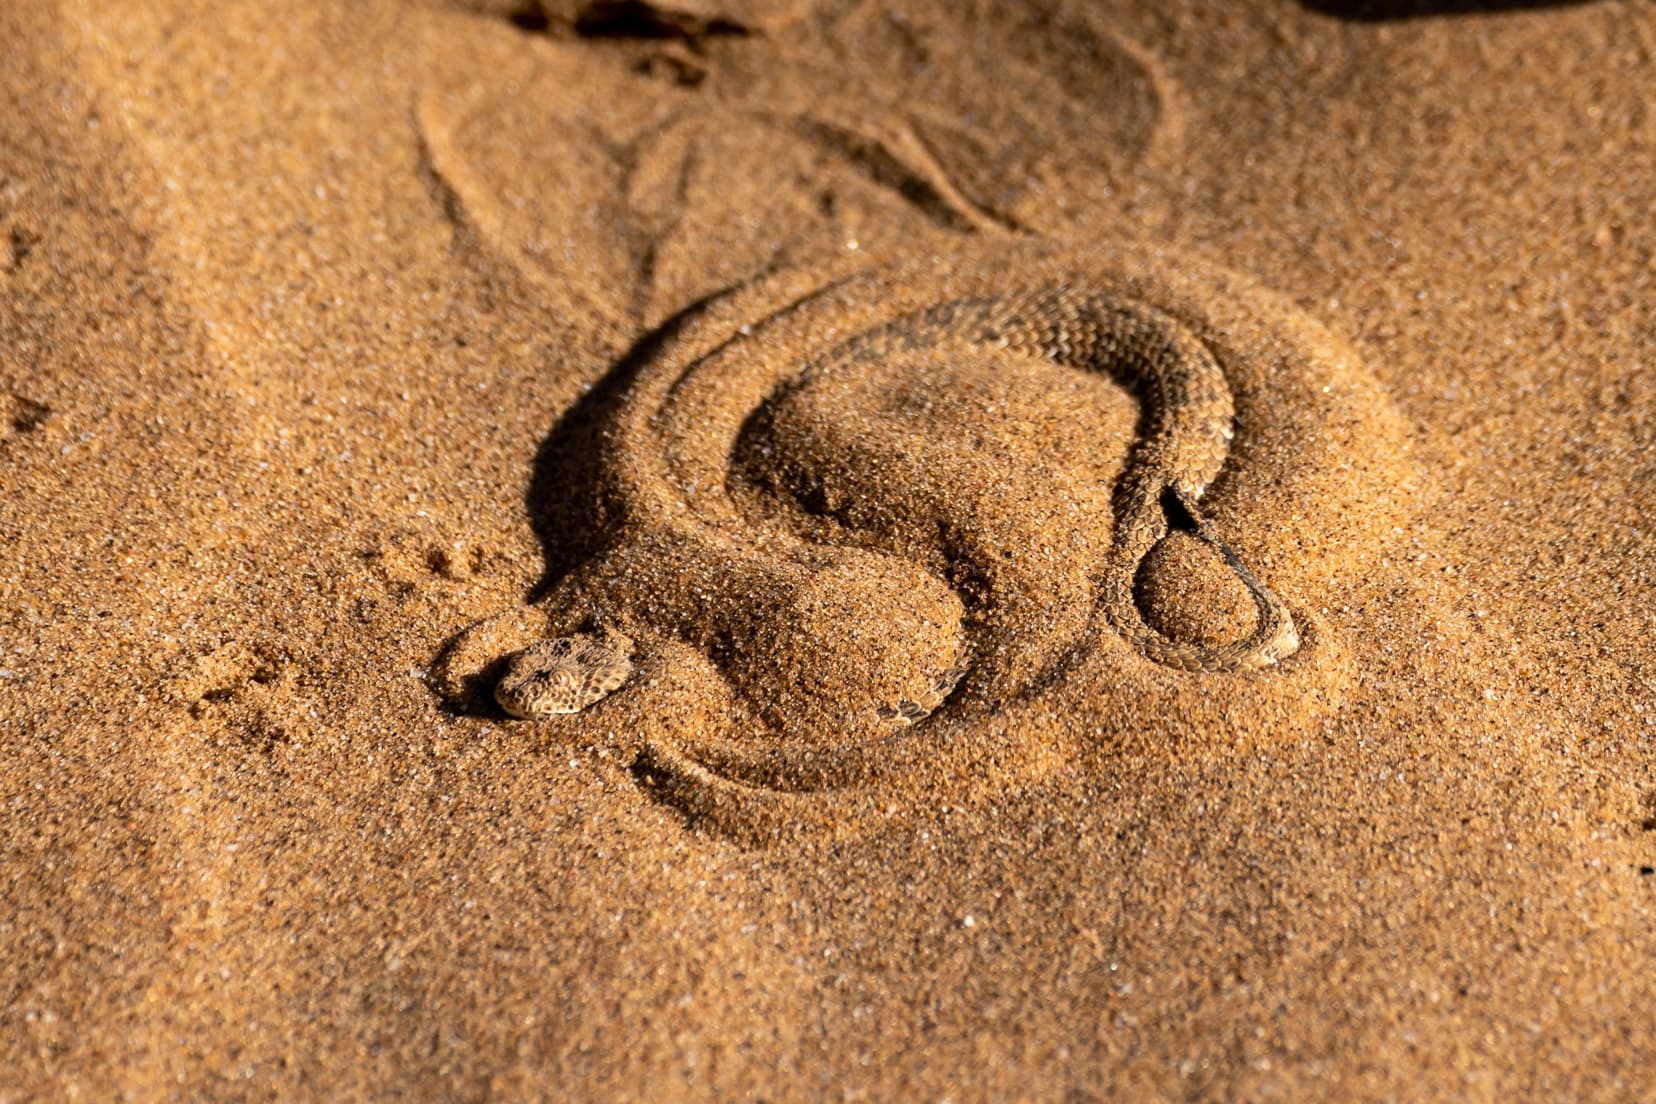 Adder coiled up in the sand